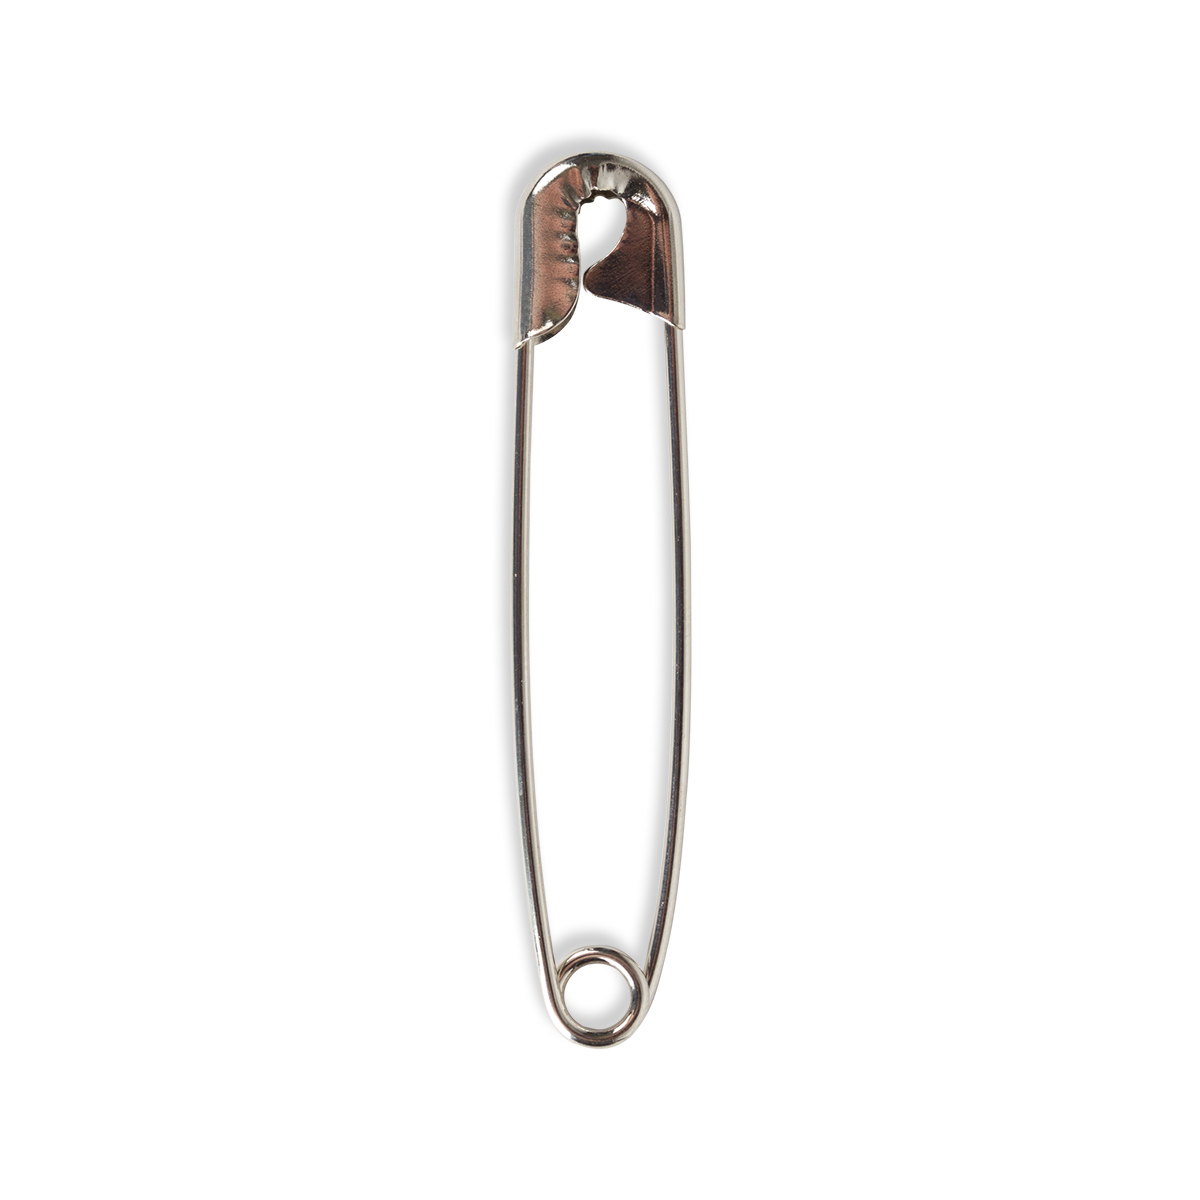 Supreme Safety Pins 1.5 inch. Item, X-2-SC #2 Closed Pin (1440